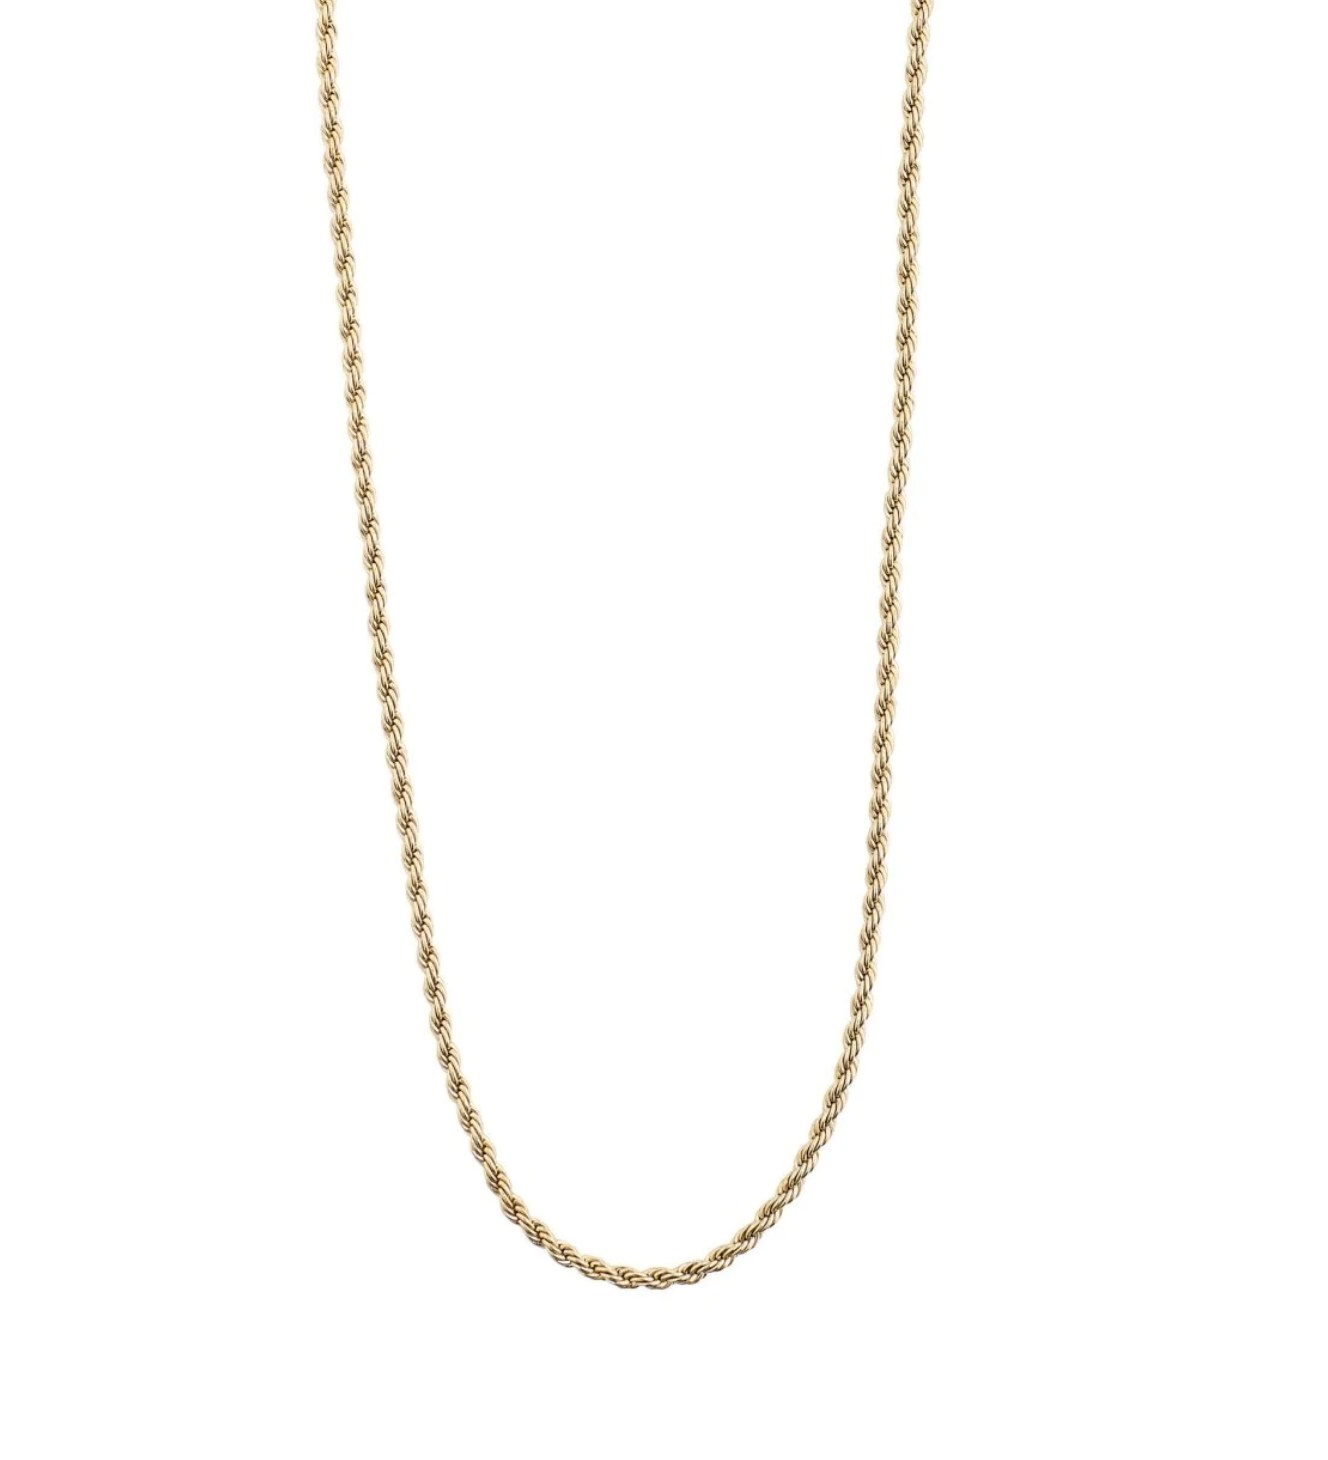 Pilgrim Pam Necklace Gold Plated